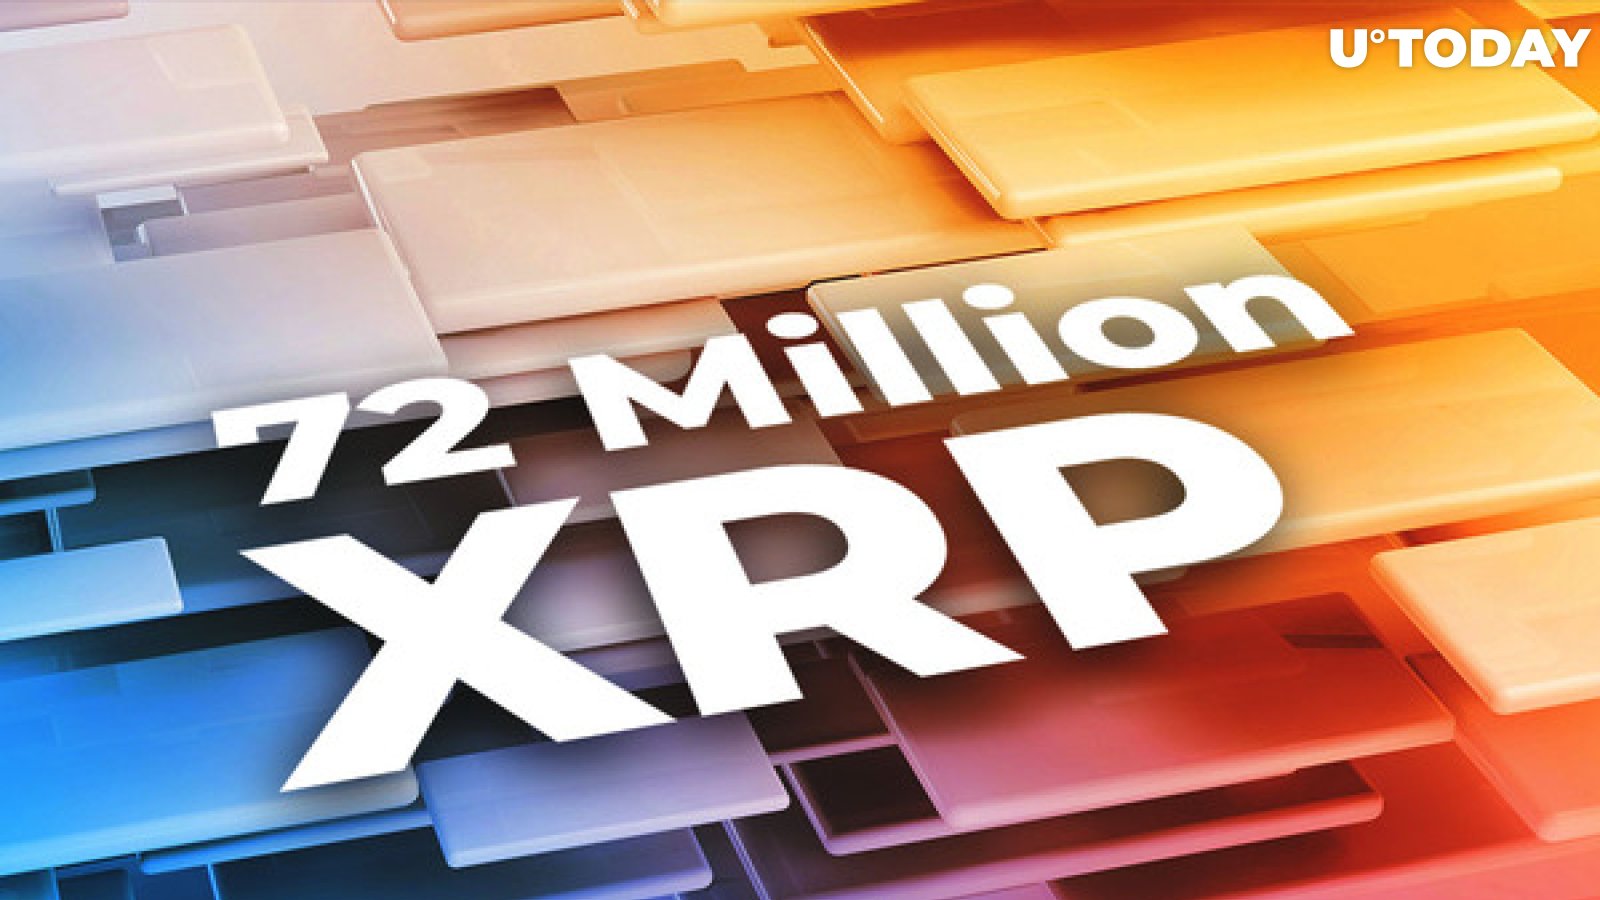 72 Million XRP On the Move, Ripple Sends Part of It to Large ODL Corridor